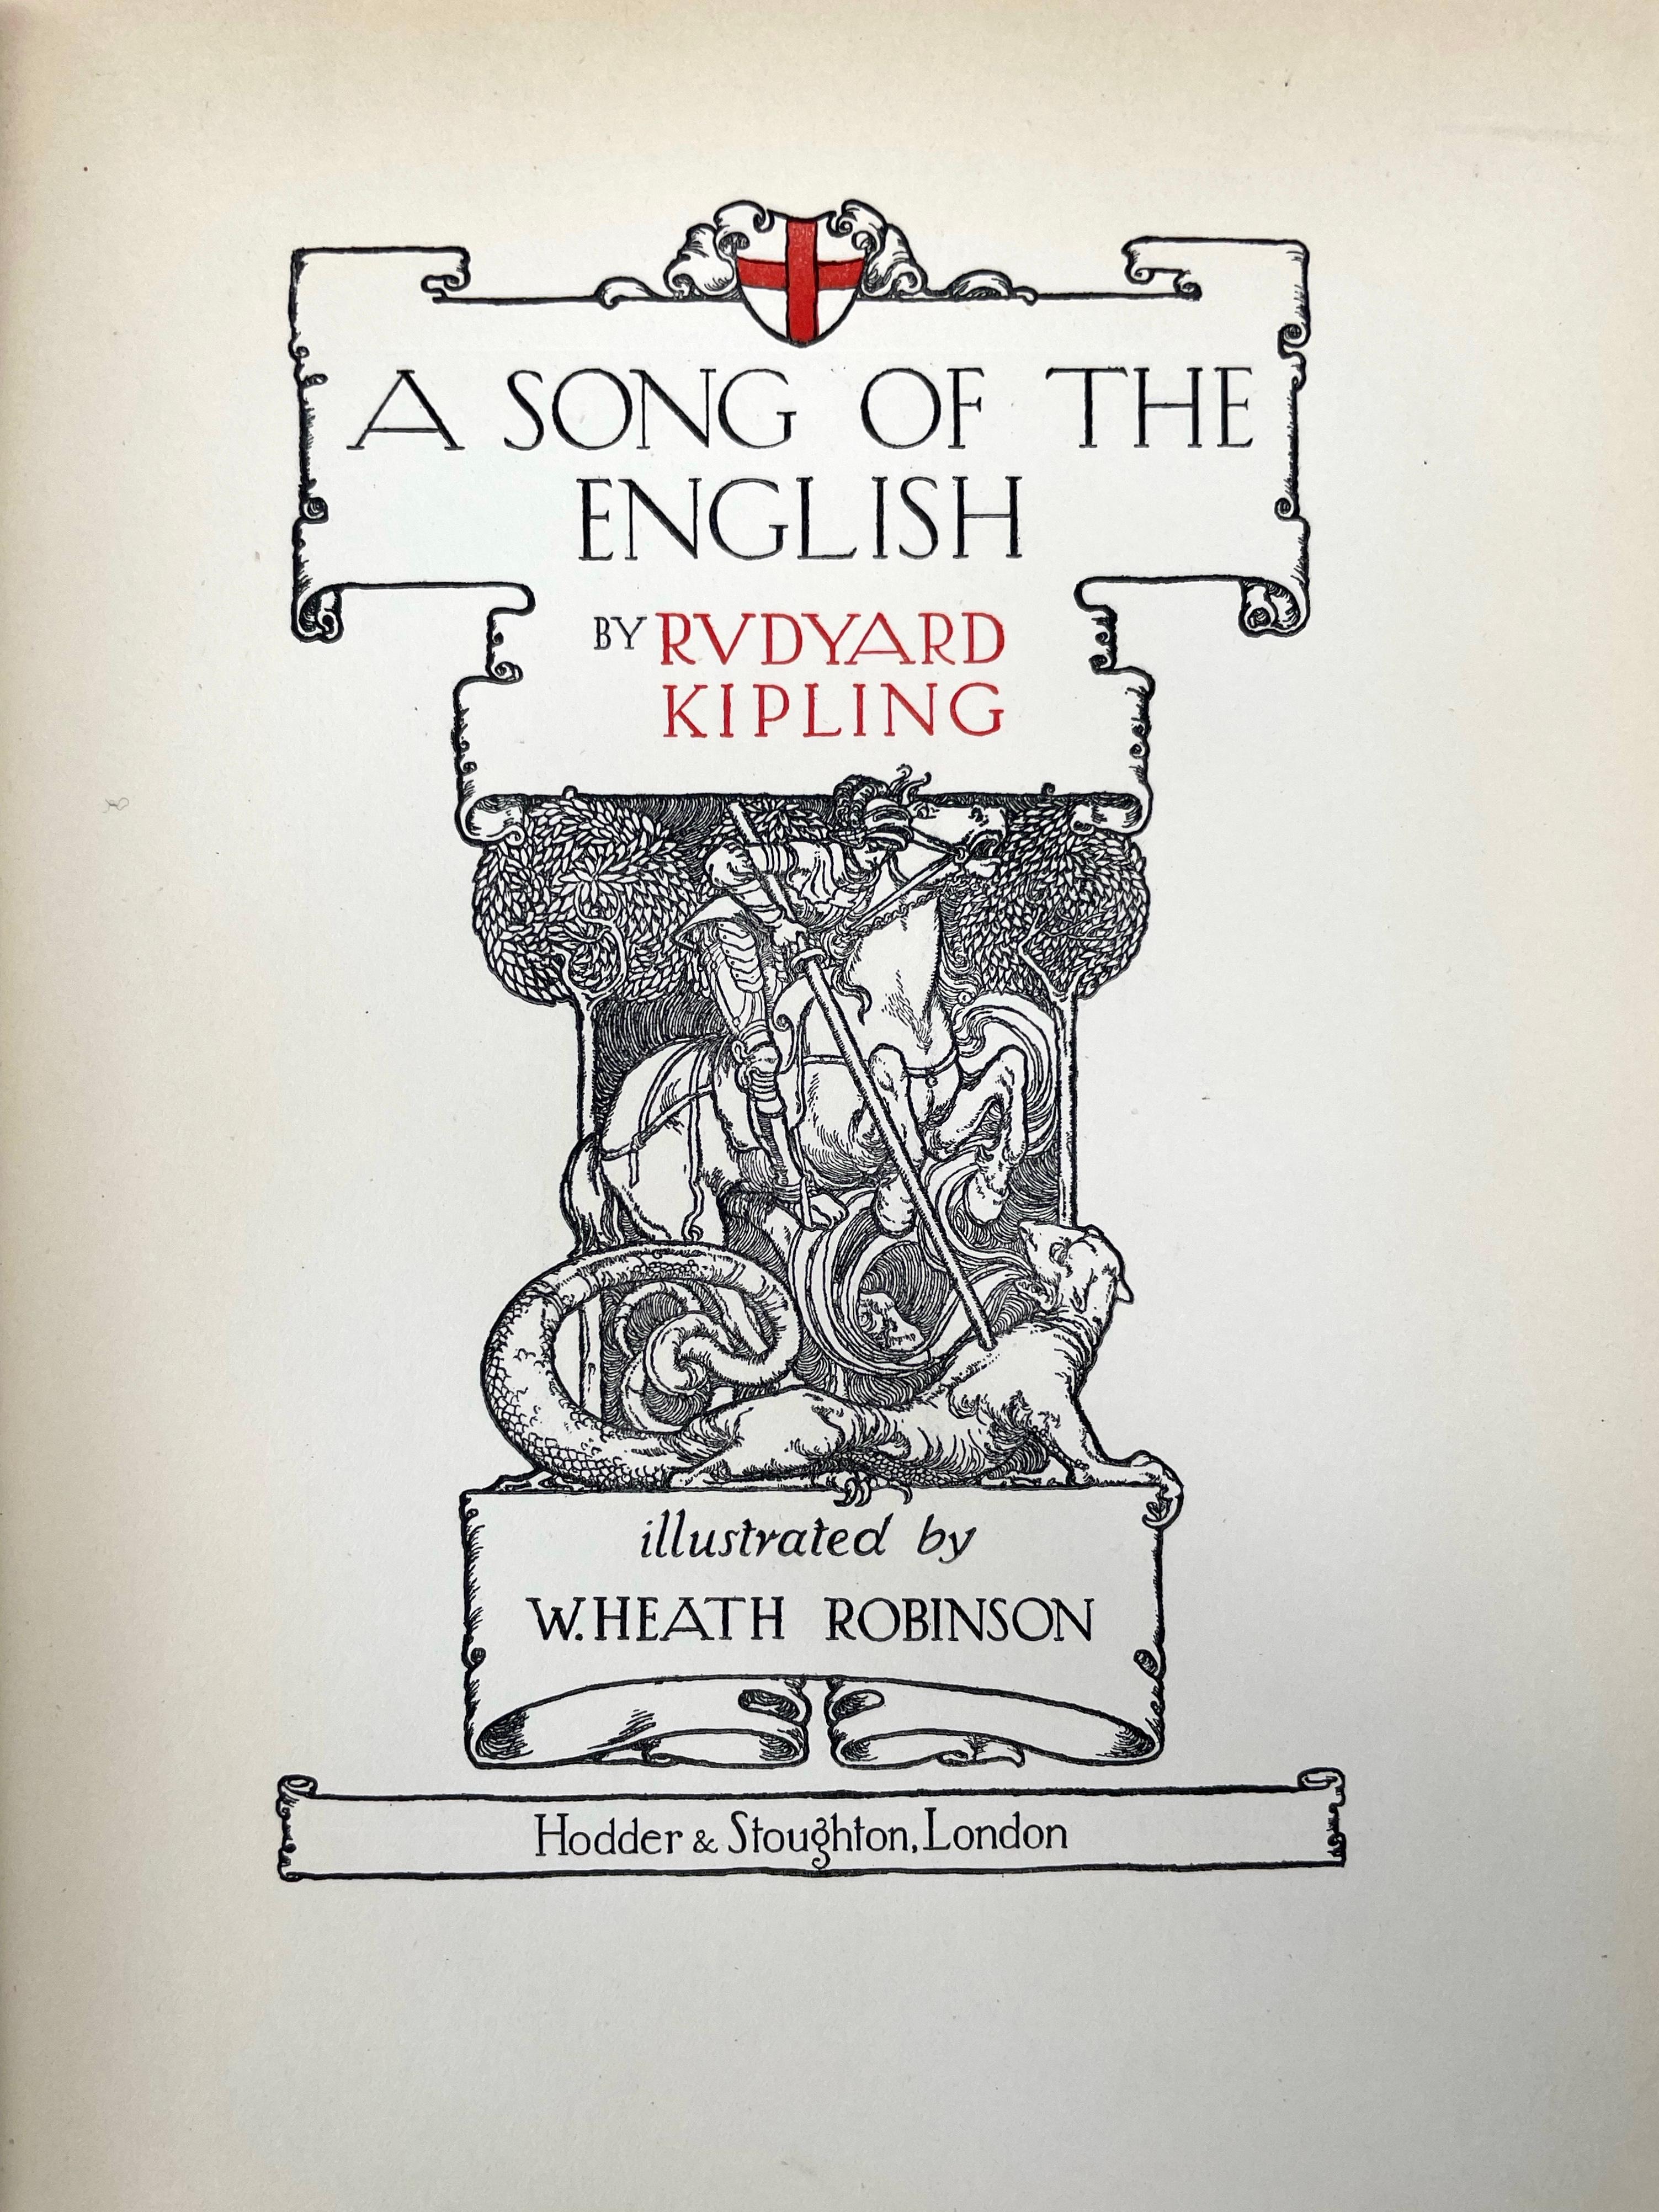 Paper First Edition a Song of the English by Rudyard Kipling For Sale